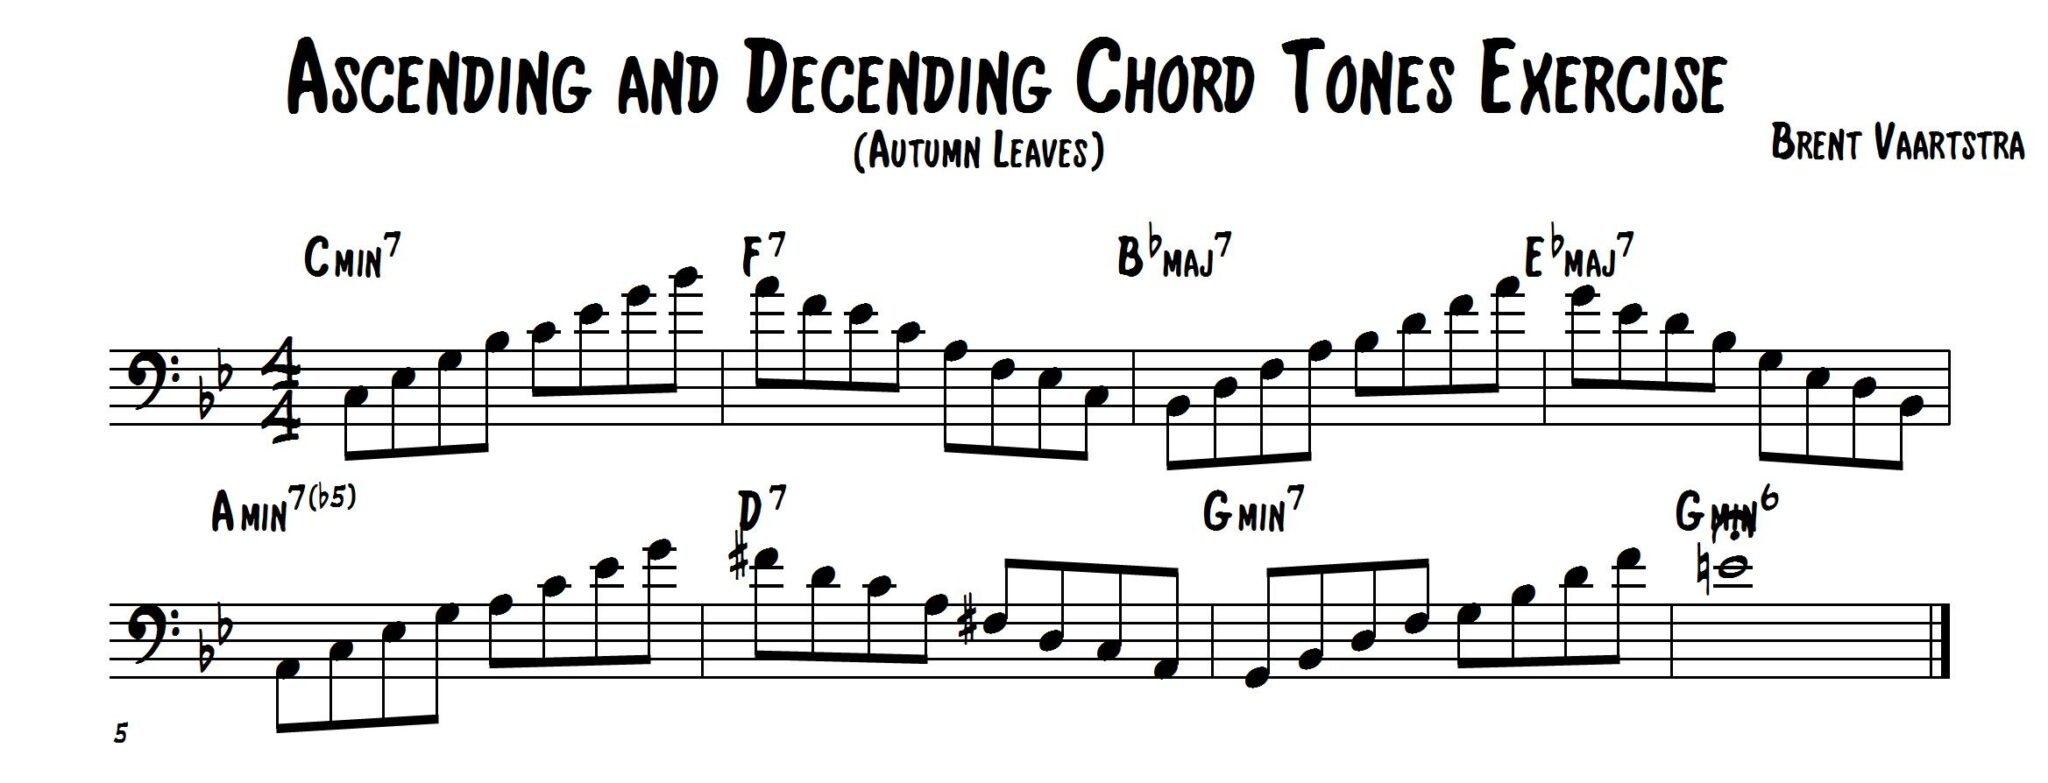 Ascending and Decending Chord Tones Exercise (Bass Clef)